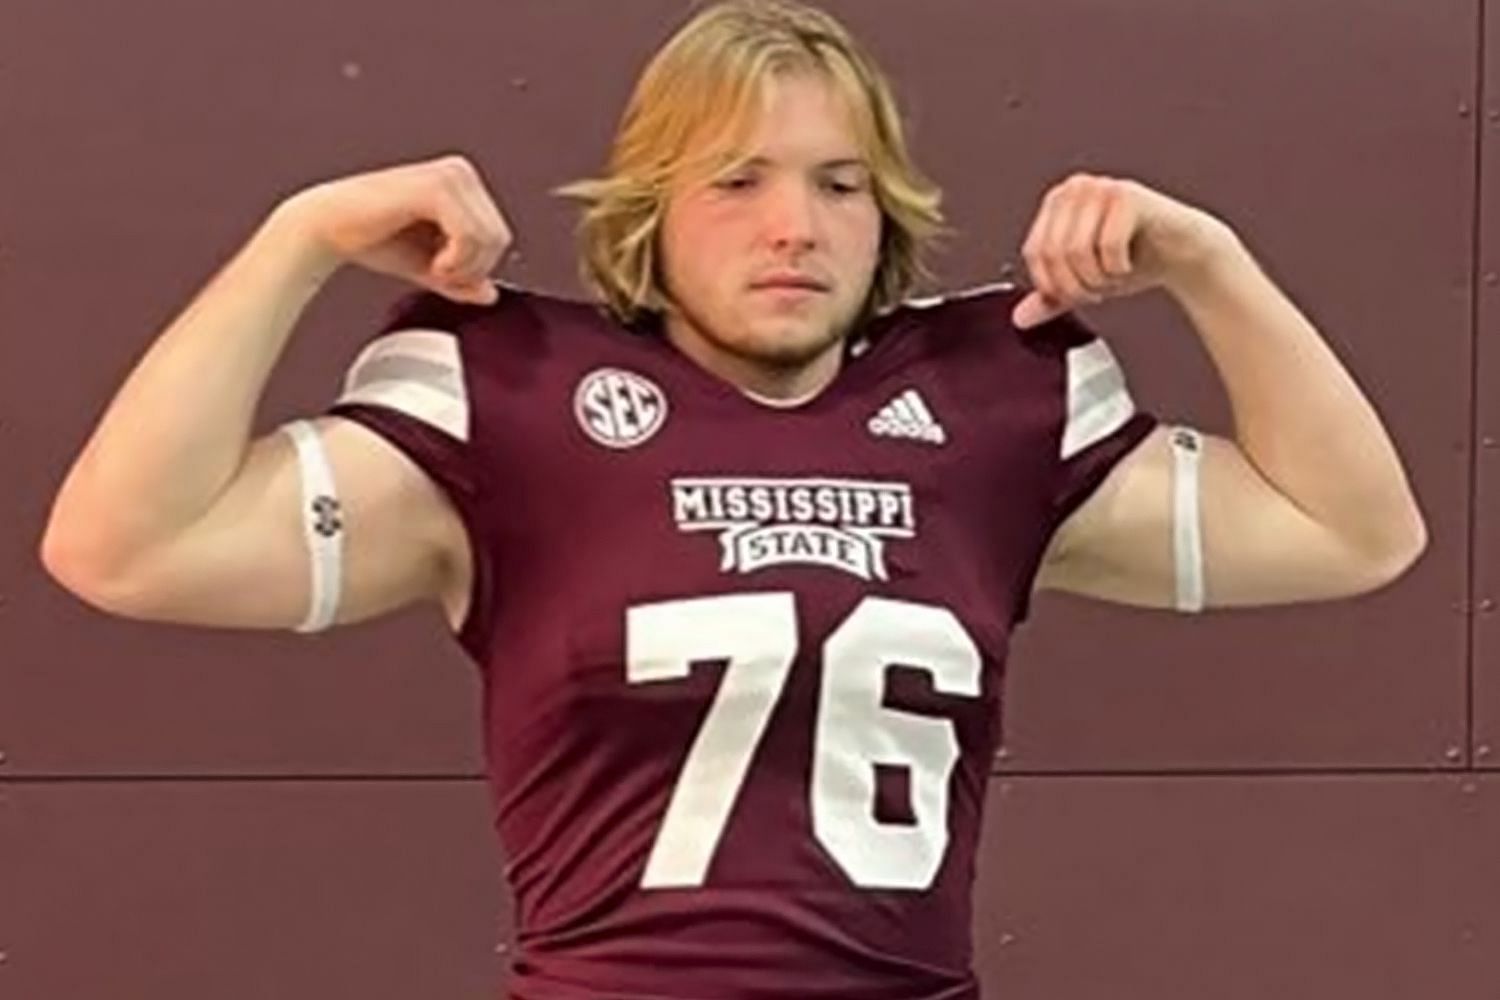 The young player was found dead (Image via Mississippi State University)